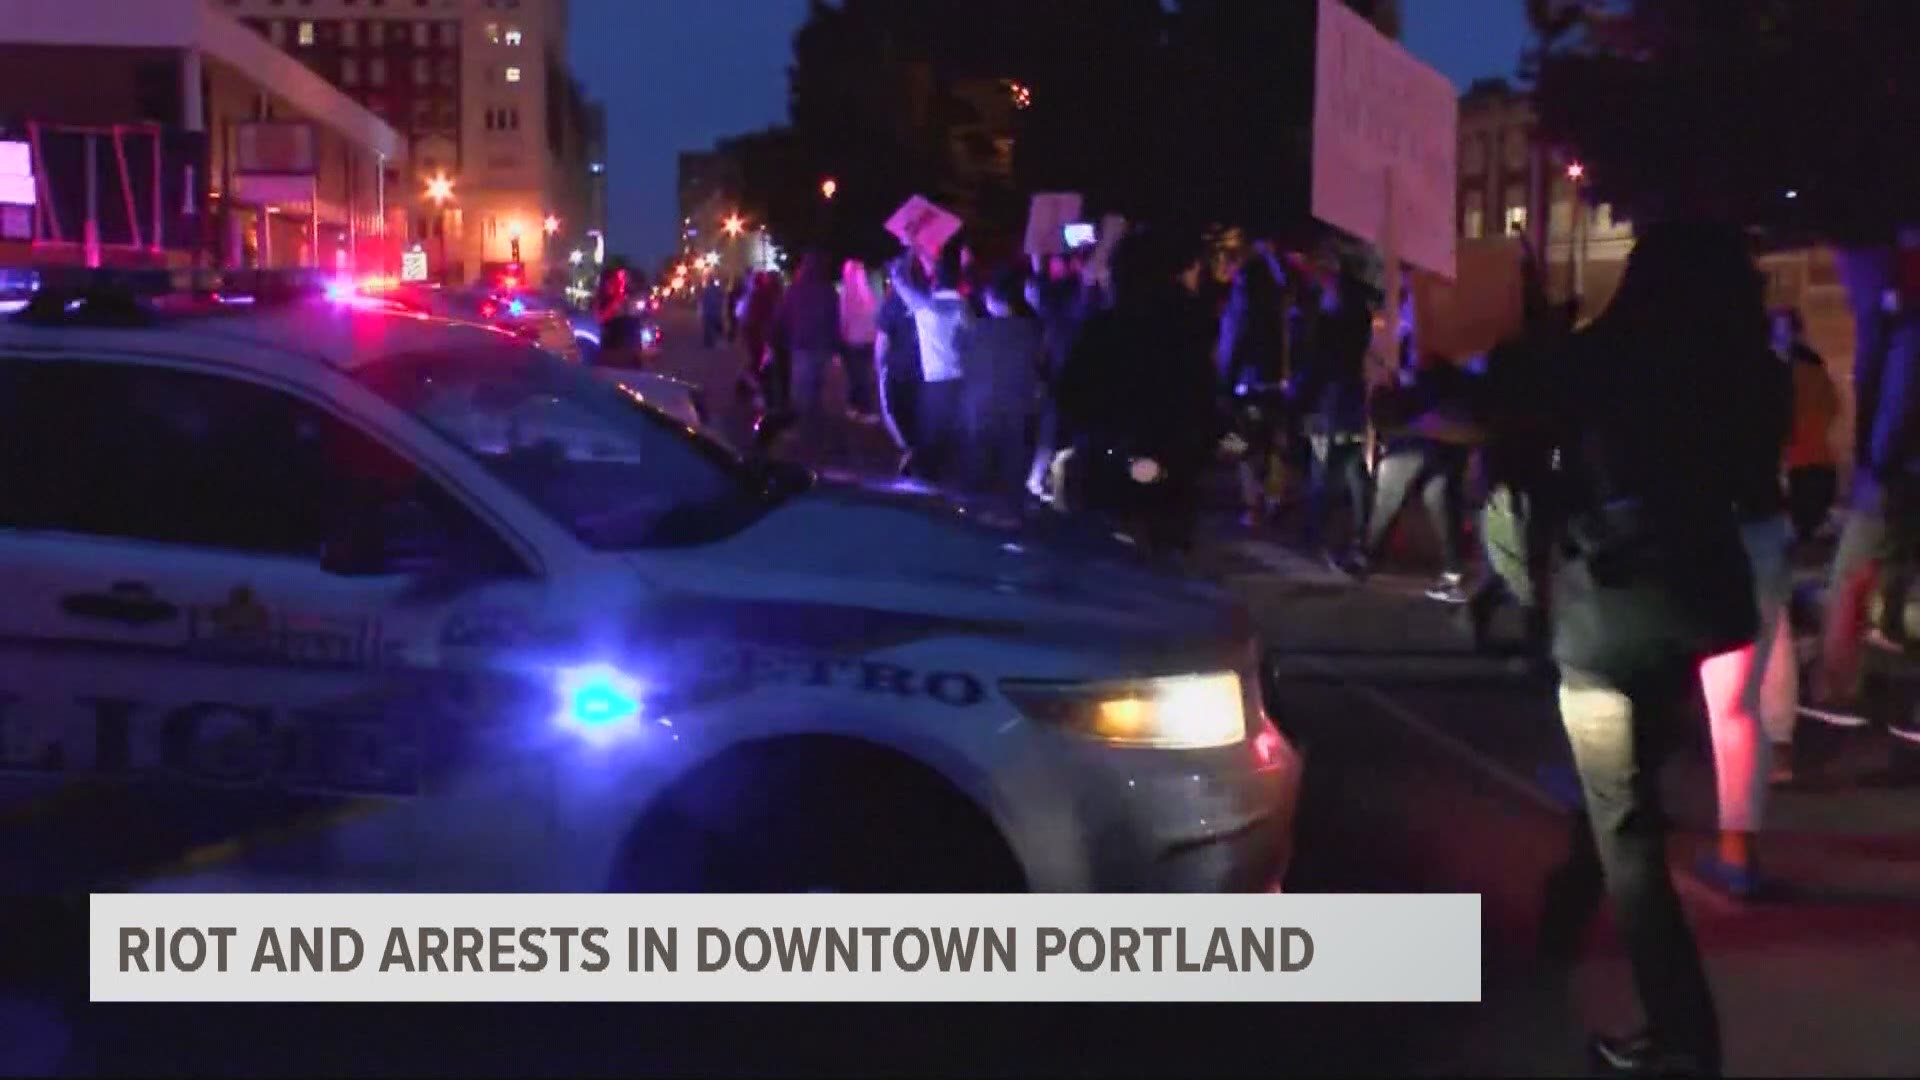 Portland police arrested 13 people, including one for attempted murder, during a riot Wednesday night in downtown Portland.